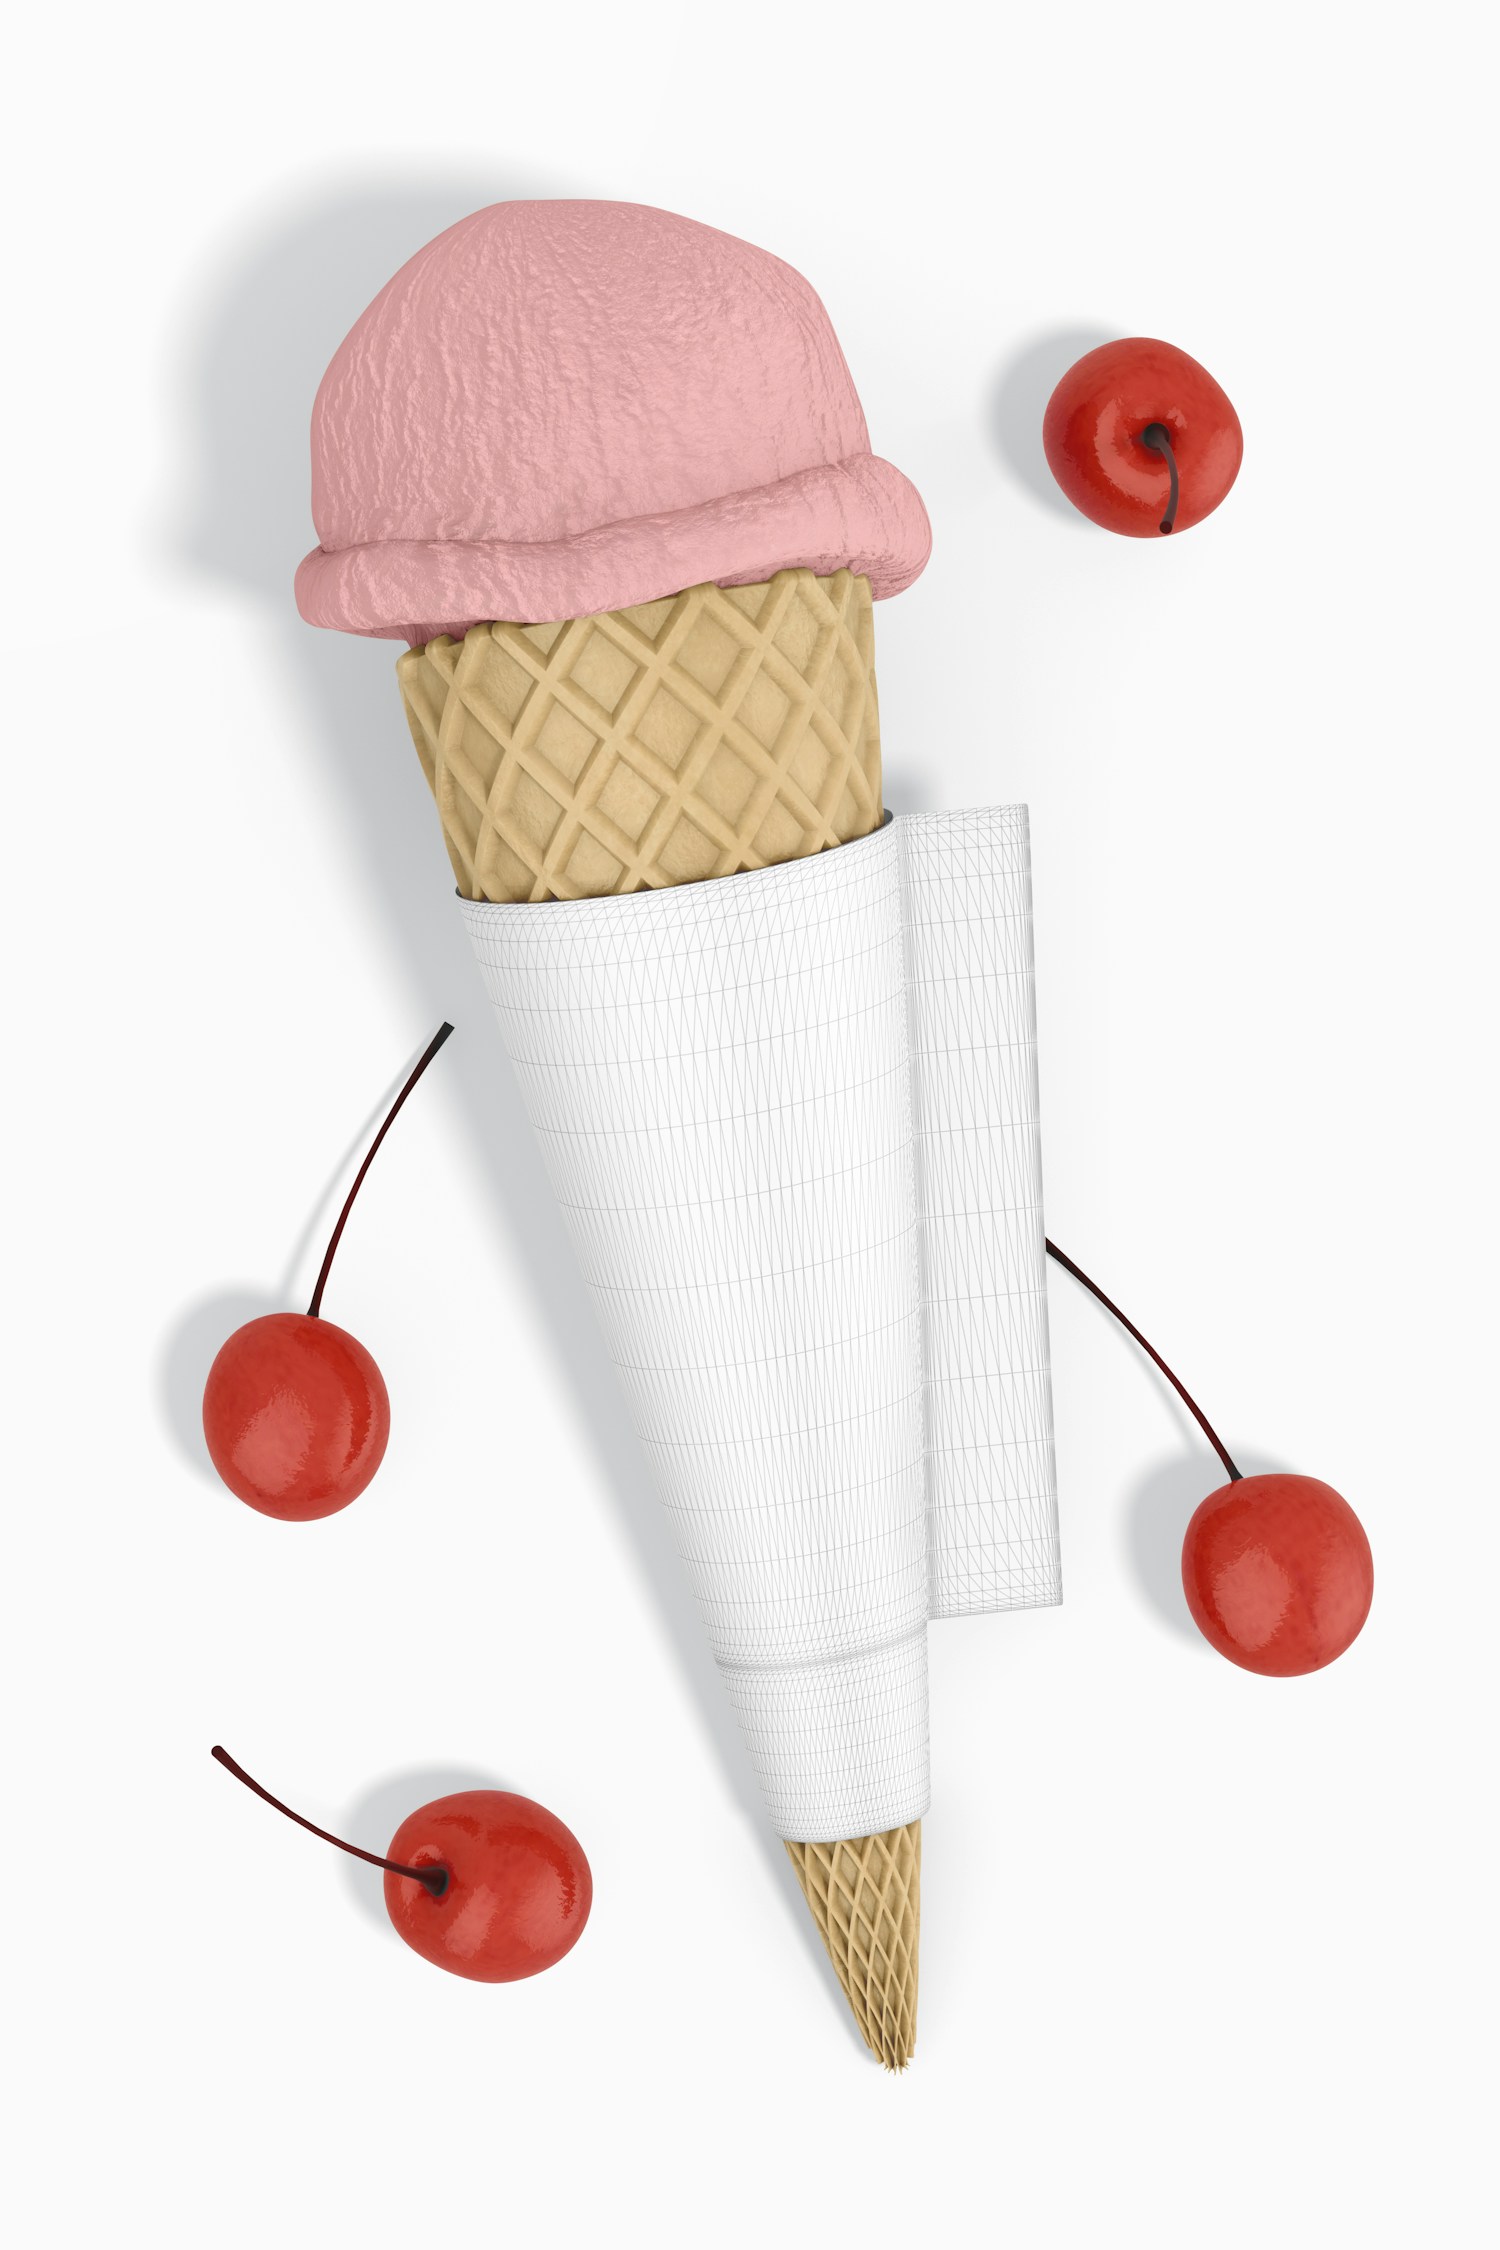 Label for Cone Mockup, with Ice Cream